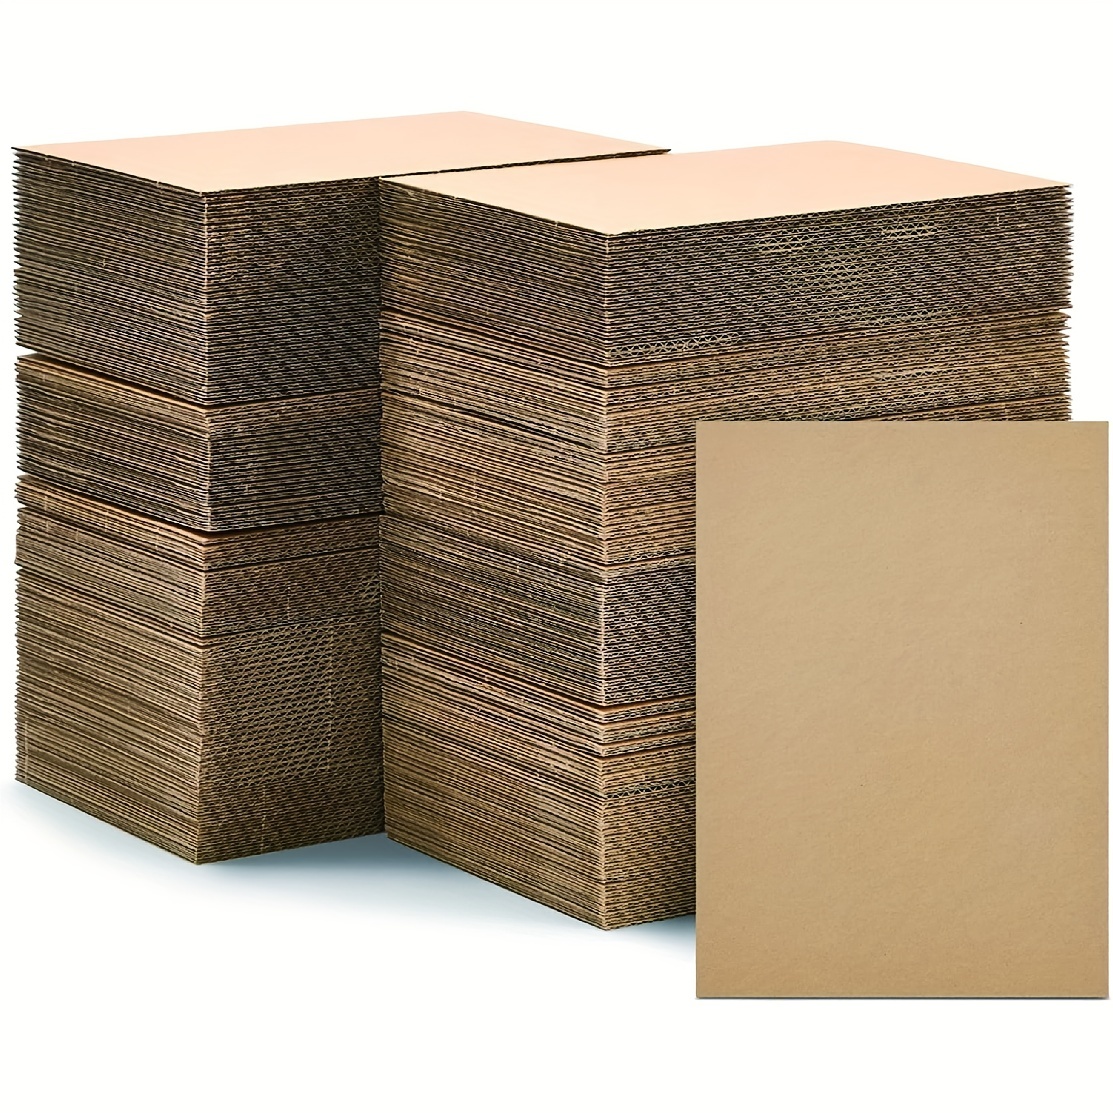 SHEUTSAN 200 Pack 6 x 4 inch Brown Corrugated Cardboard Sheets, 1.5mm Thick Corrugated Cardboard Sheets Pads for Albums Cover, Scrapbook, Printouts